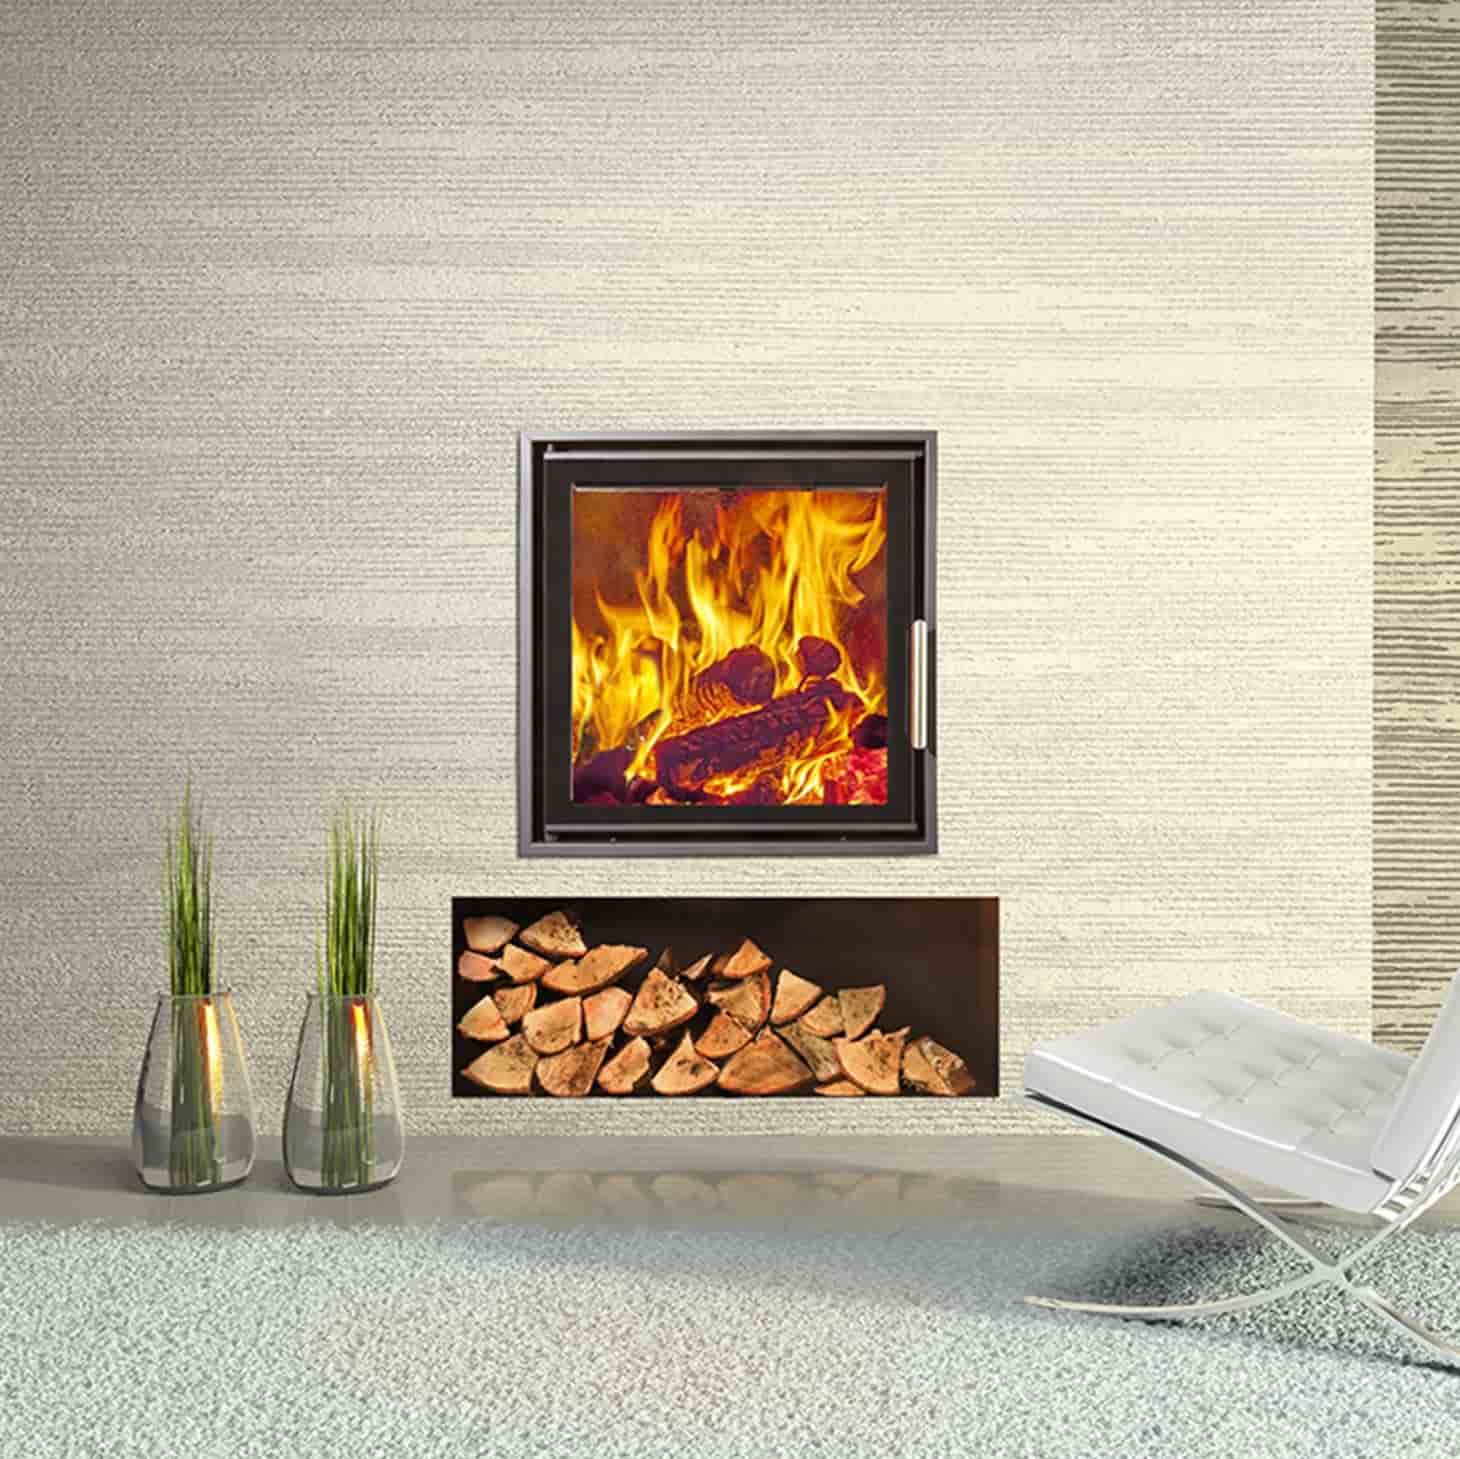 Woodfire EX15 Inset Boiler Stove